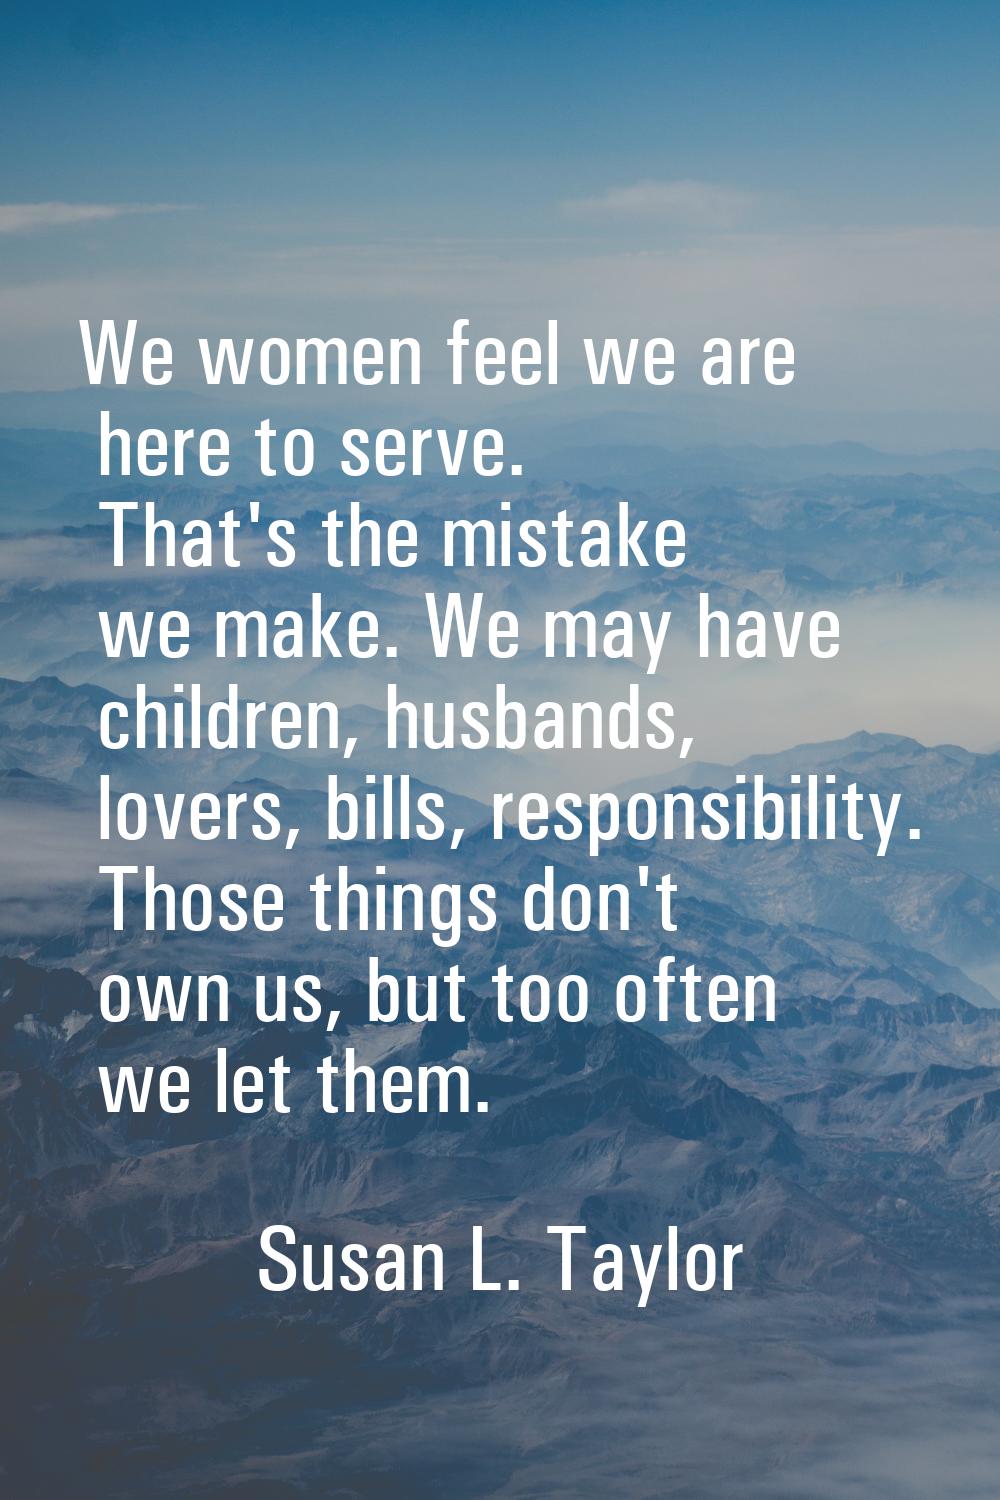 We women feel we are here to serve. That's the mistake we make. We may have children, husbands, lov